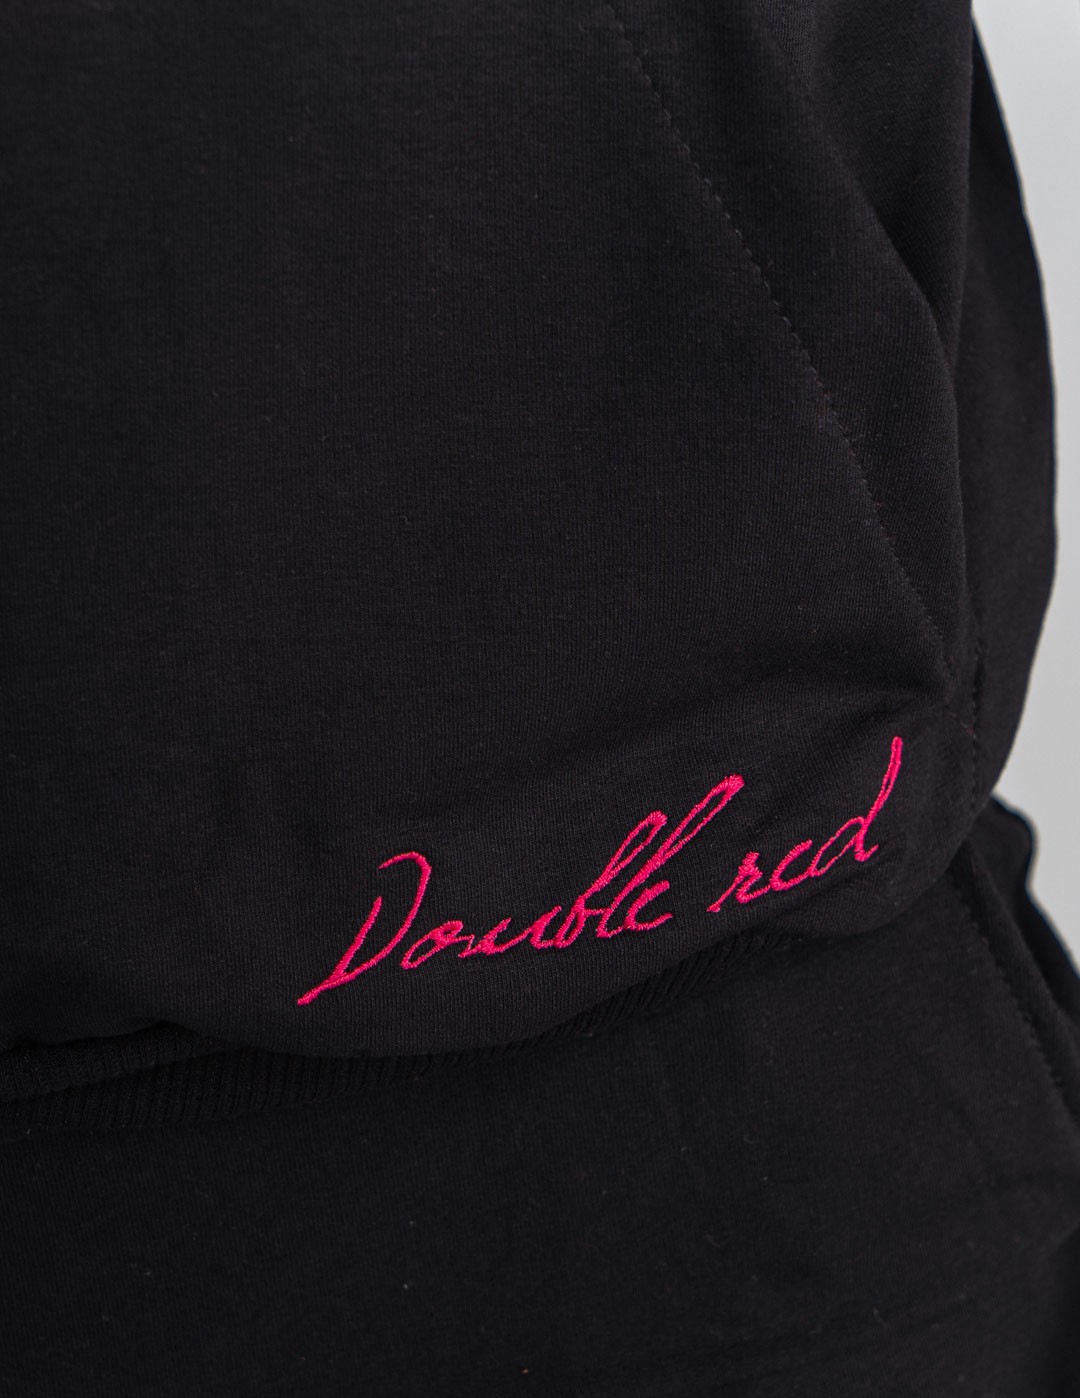 Hoodie Neon Street Collection Black/Pink